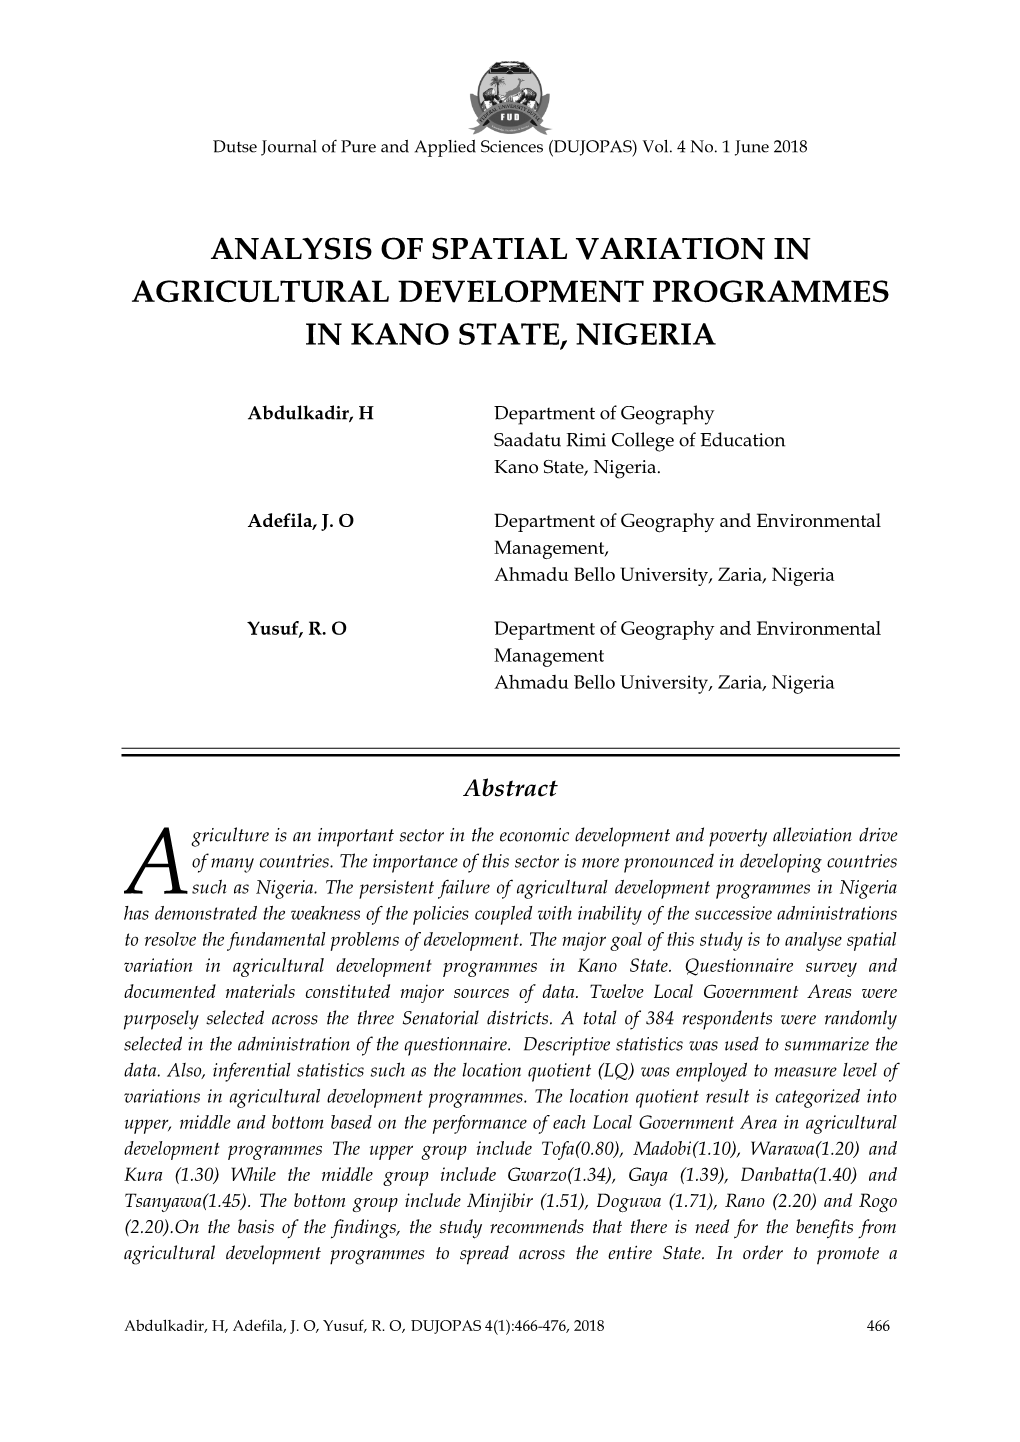 Analysis of Spatial Variation in Agricultural Development Programmes in Kano State, Nigeria